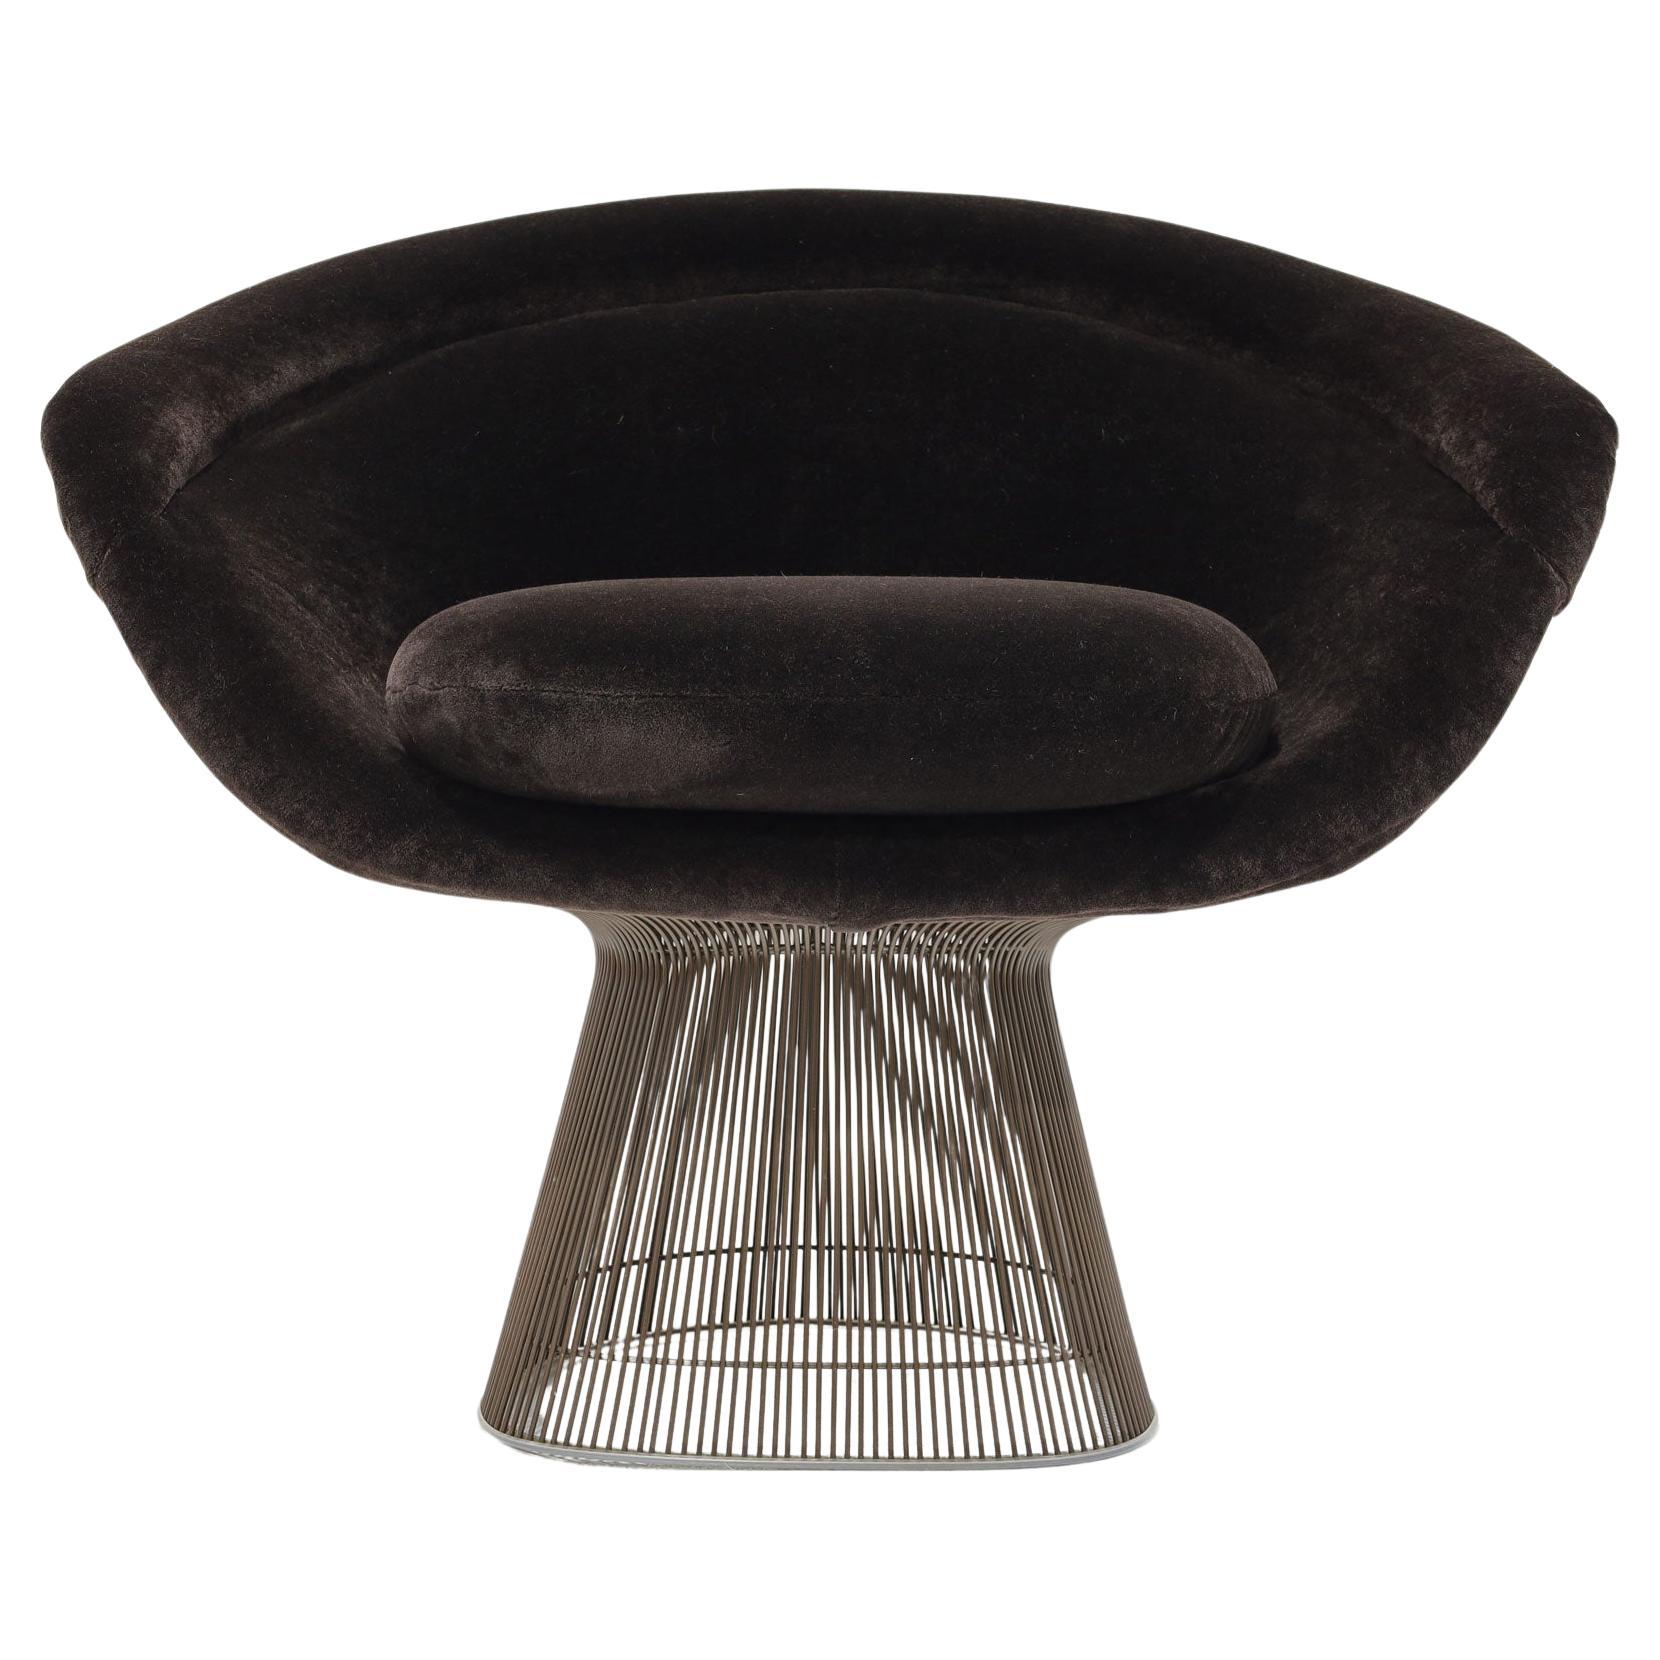 How is a Platner chair made?